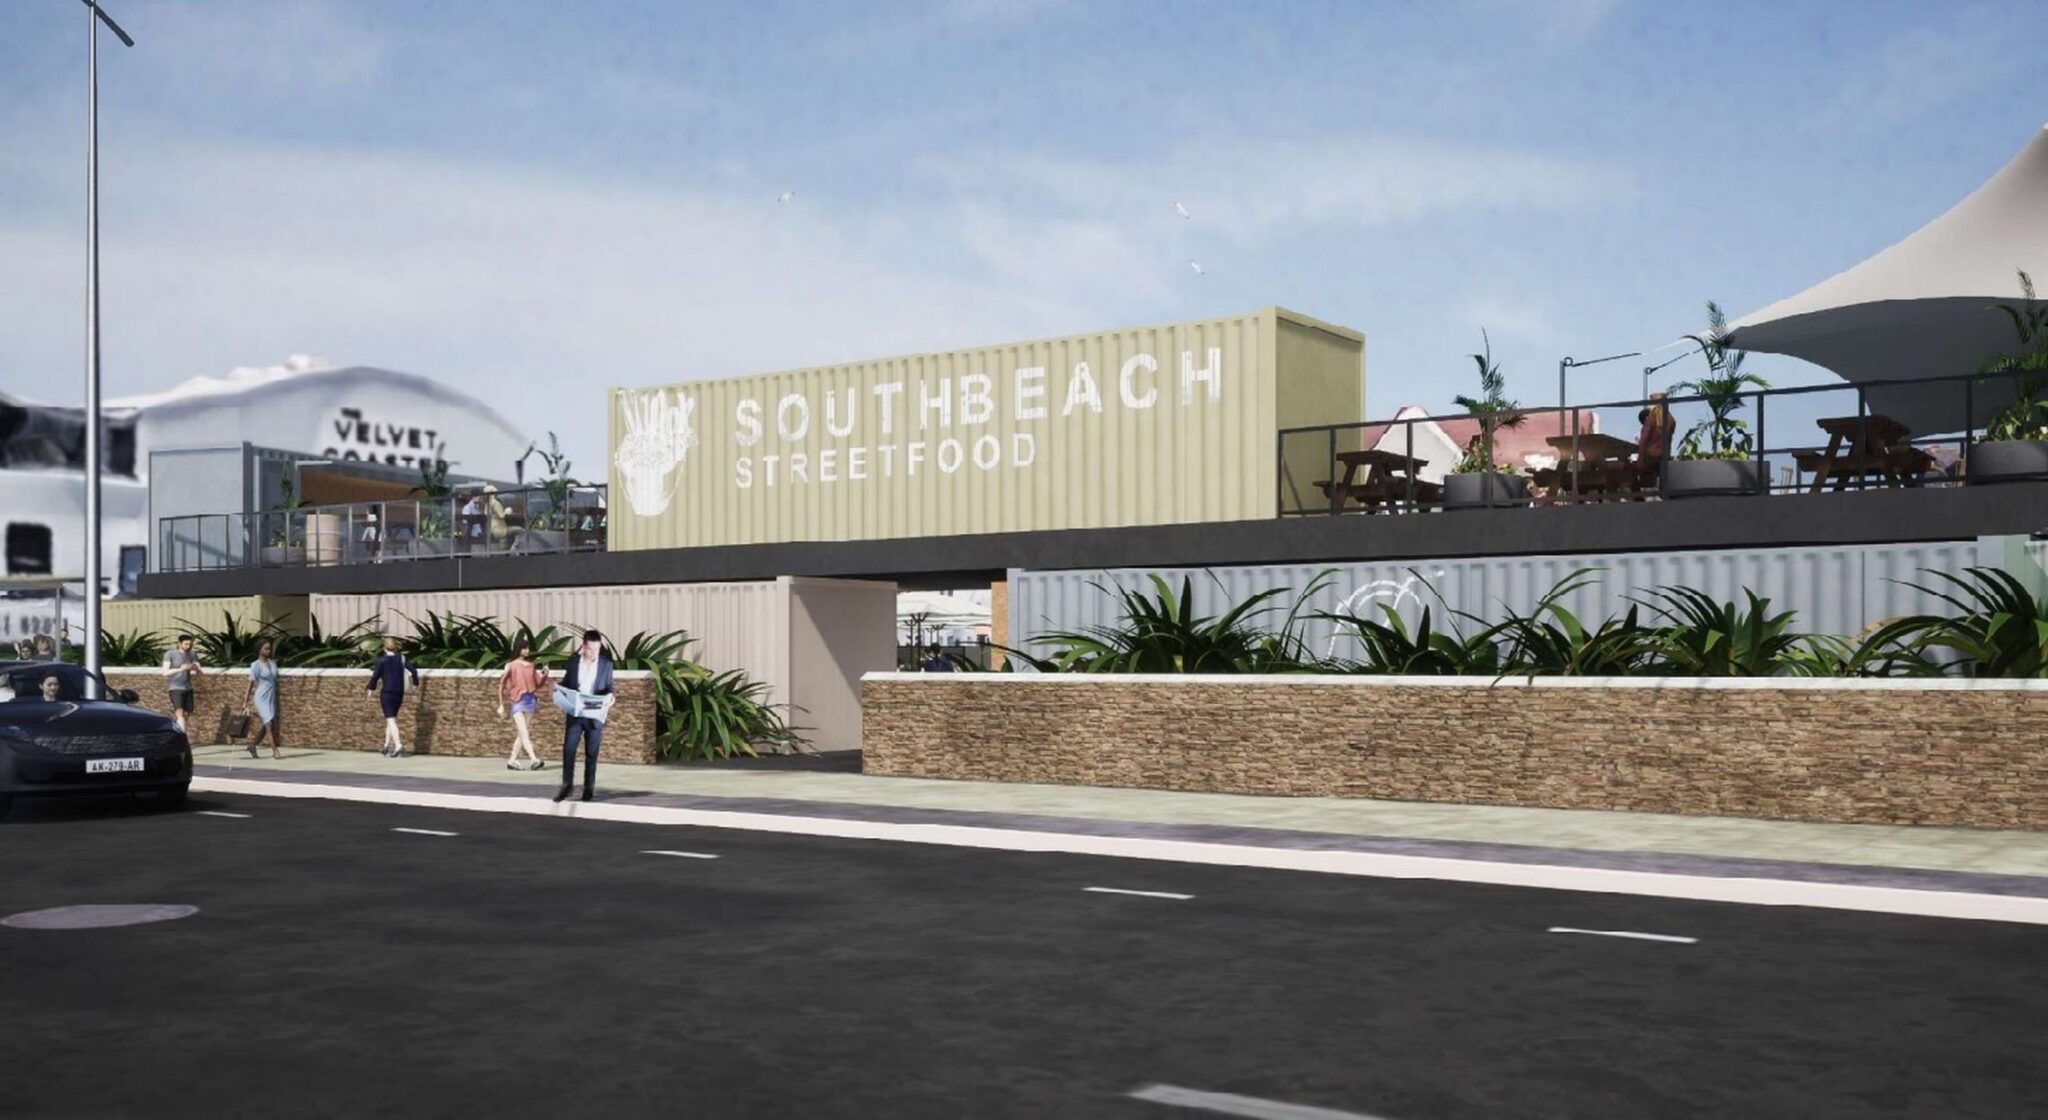 Plans for Southbeach Streetfood